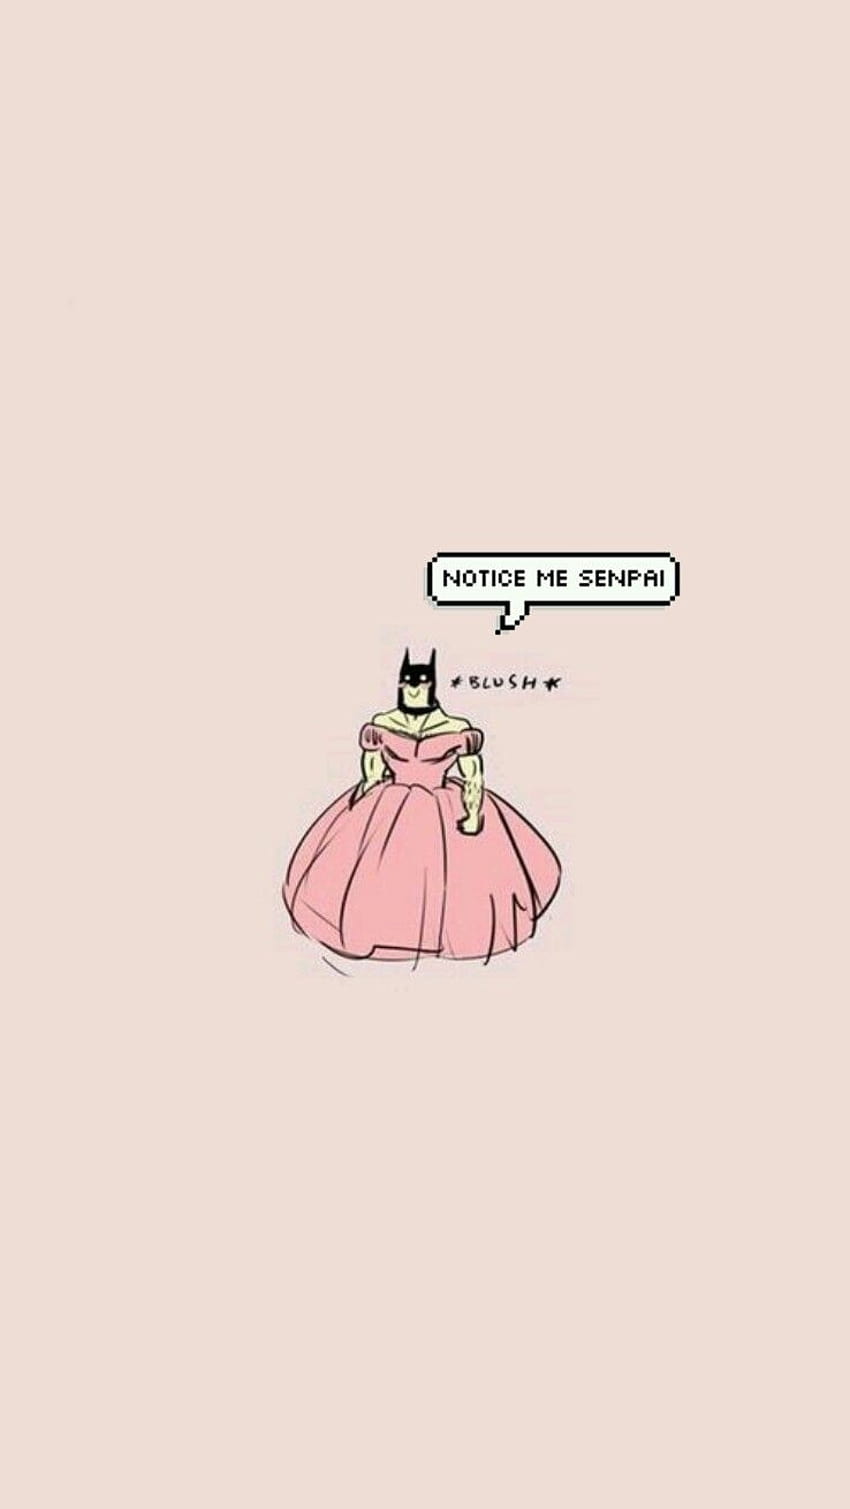 A drawing of batman in a pink dress with a speech bubble saying 